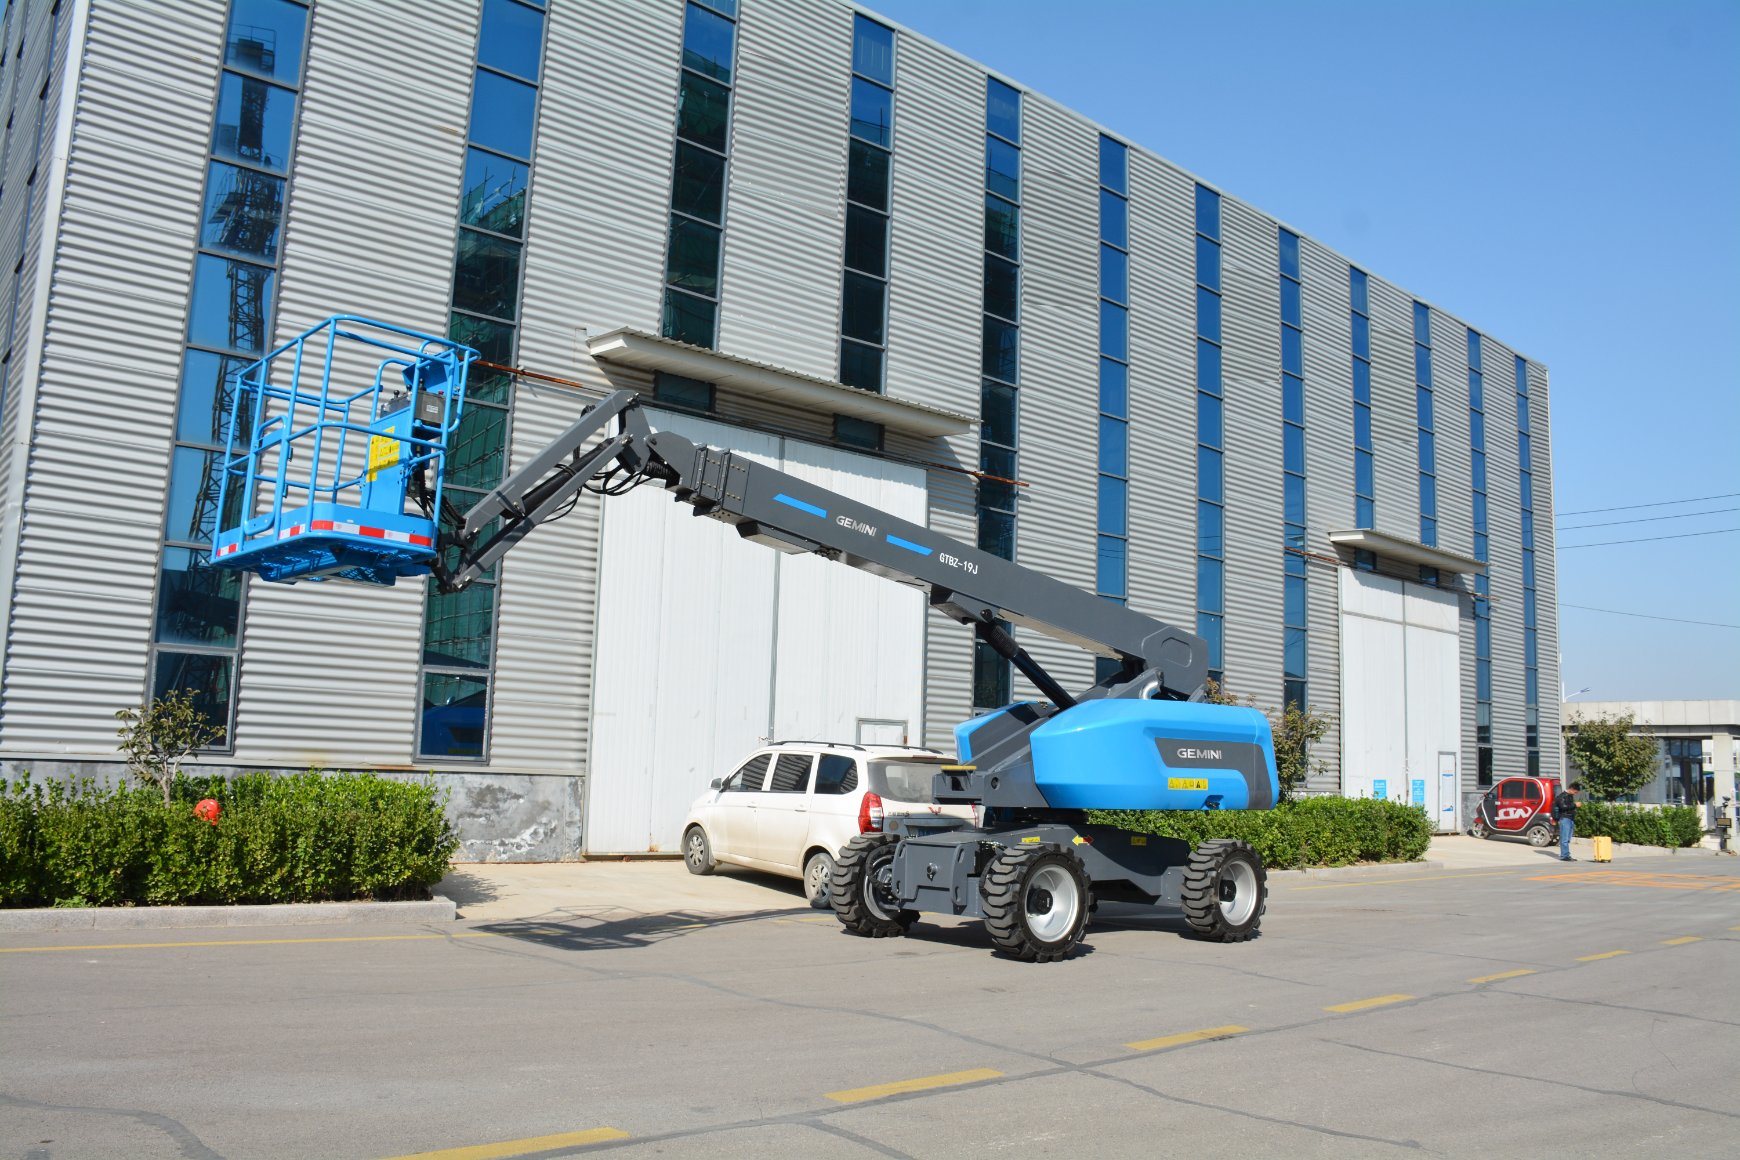 Mobile Articulated Lift Platform Self Propelled Telescopic Boom Lifts